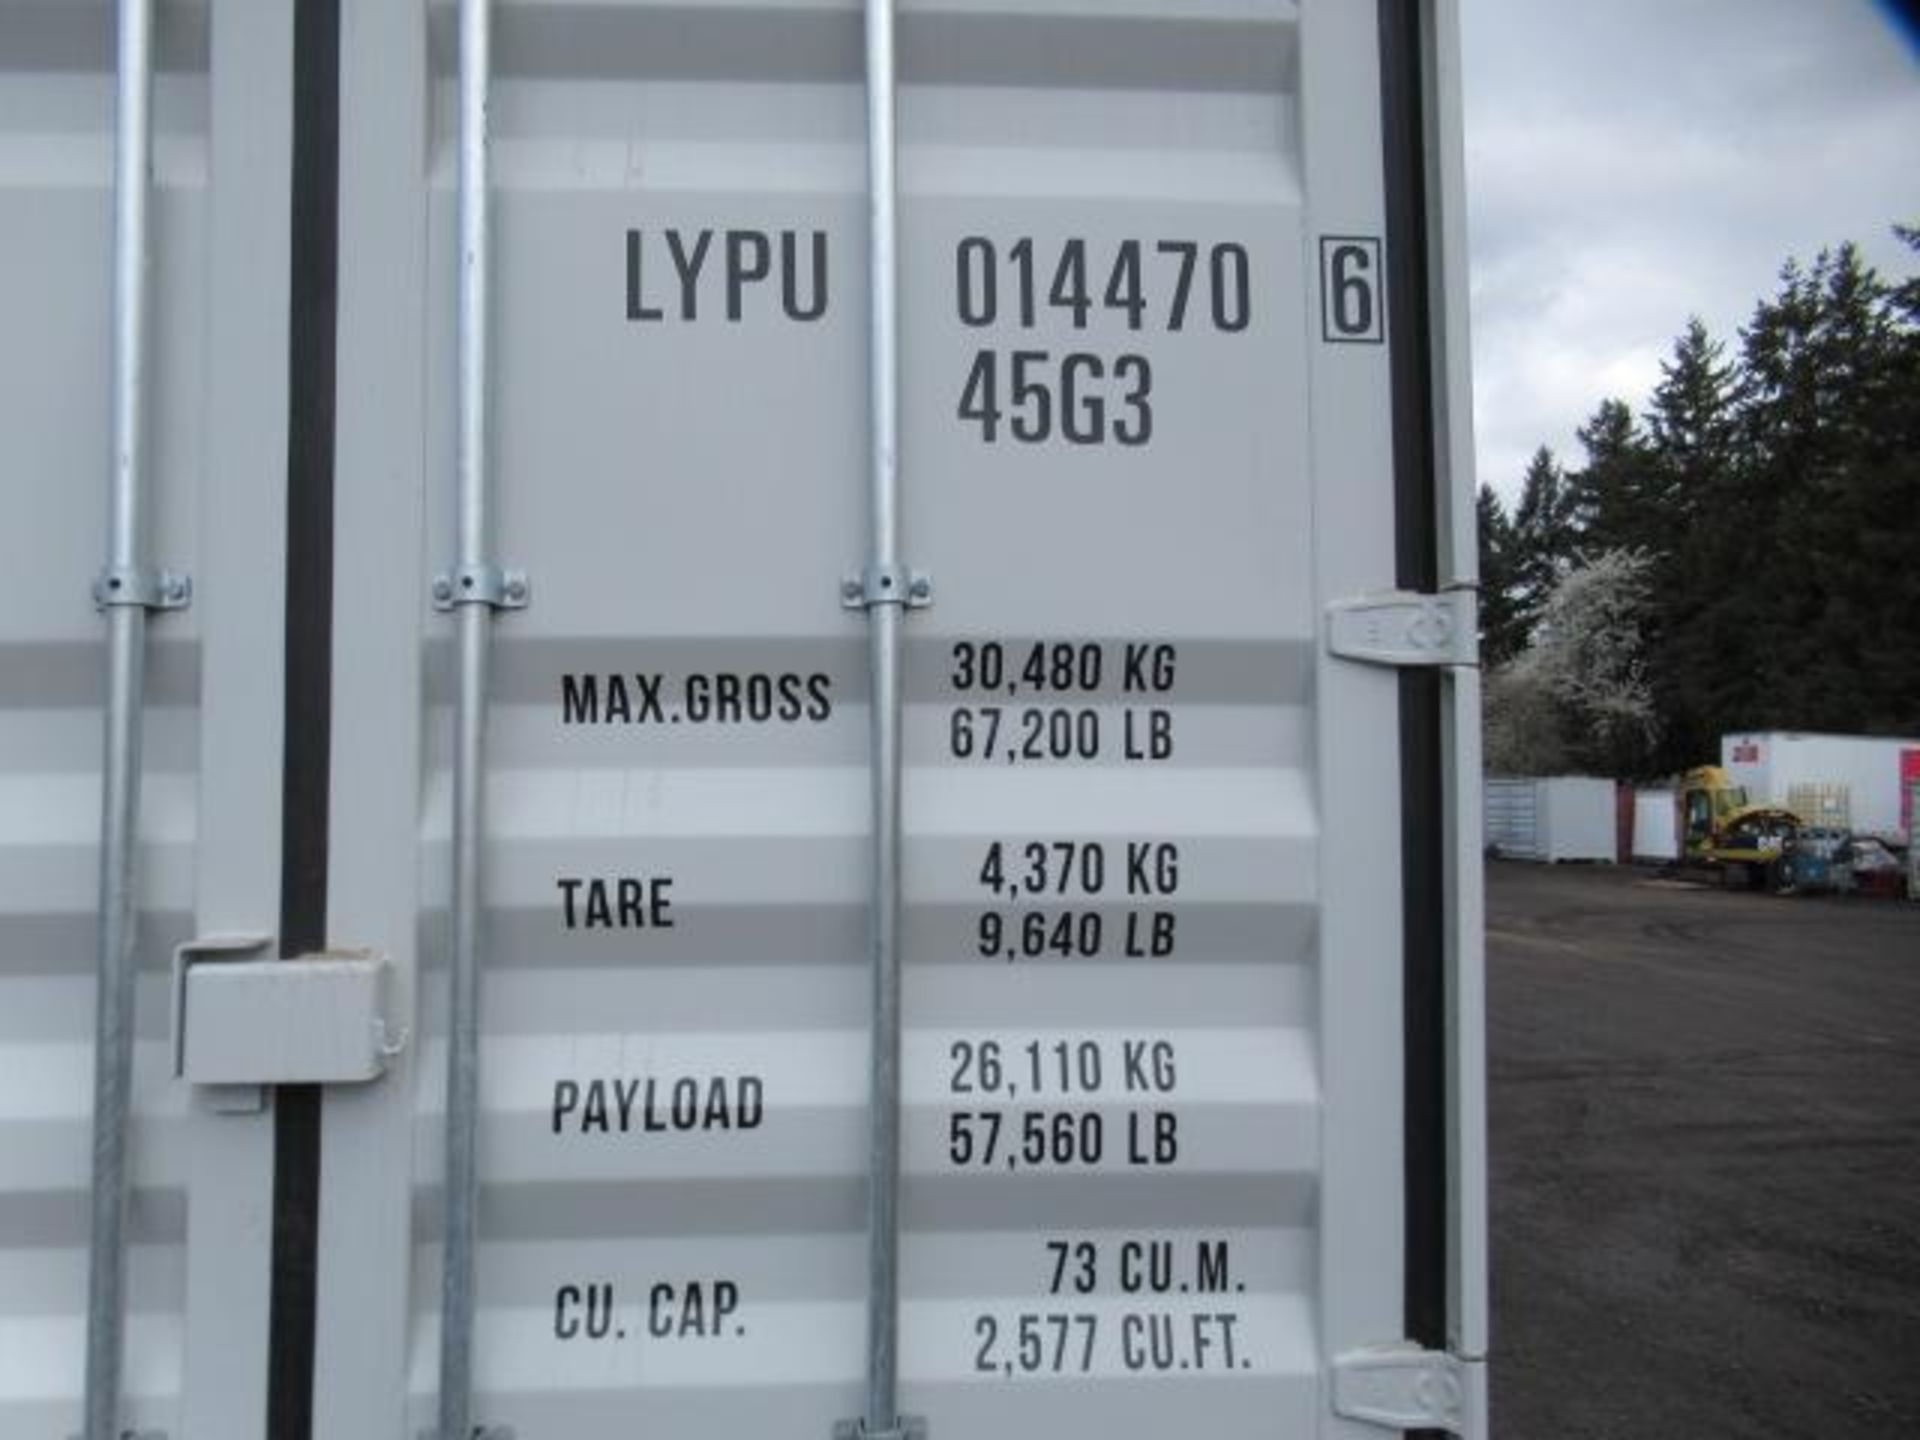 2024 40' HIGH CUBE SHIPPING CONTAINER W/ (2) SIDE DOORS, SER#: LYPU0144706 (UNUSED) - Image 6 of 6